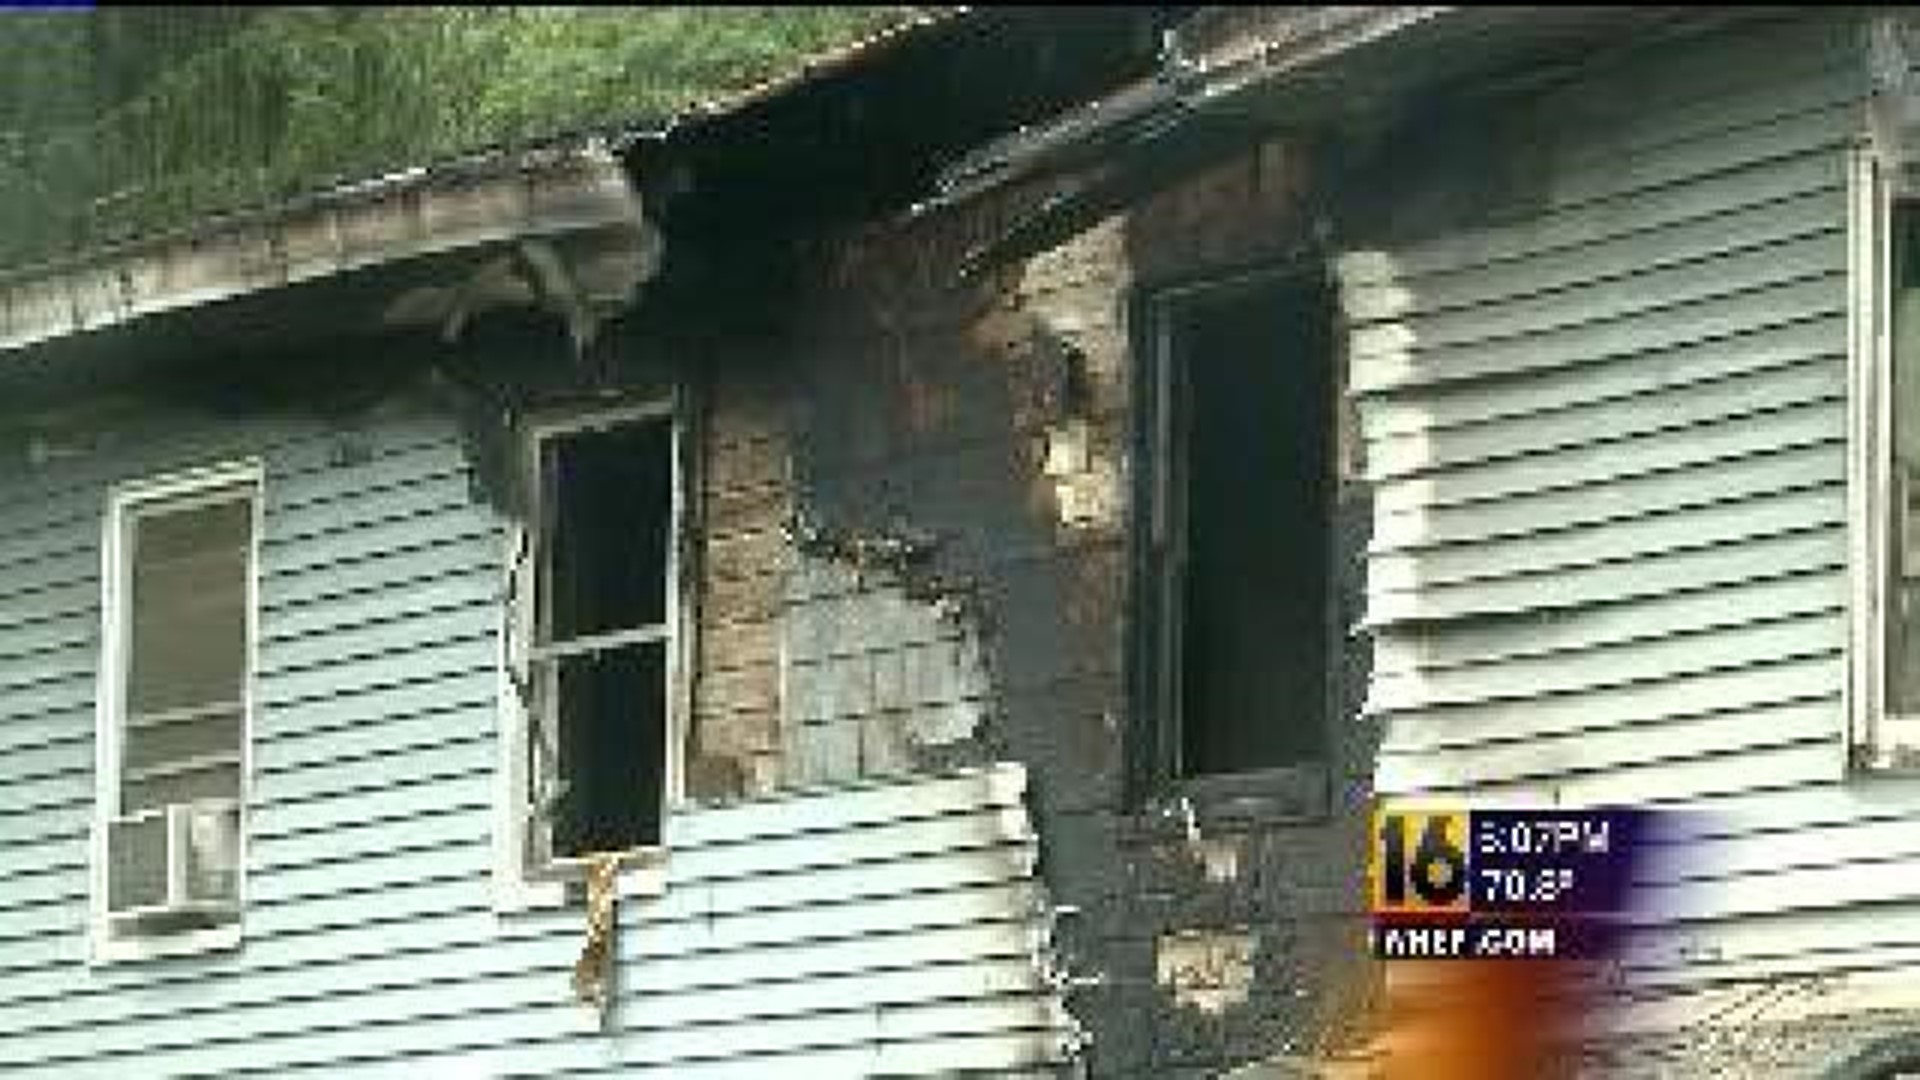 Family Loses Home, Dogs in Overnight Fire